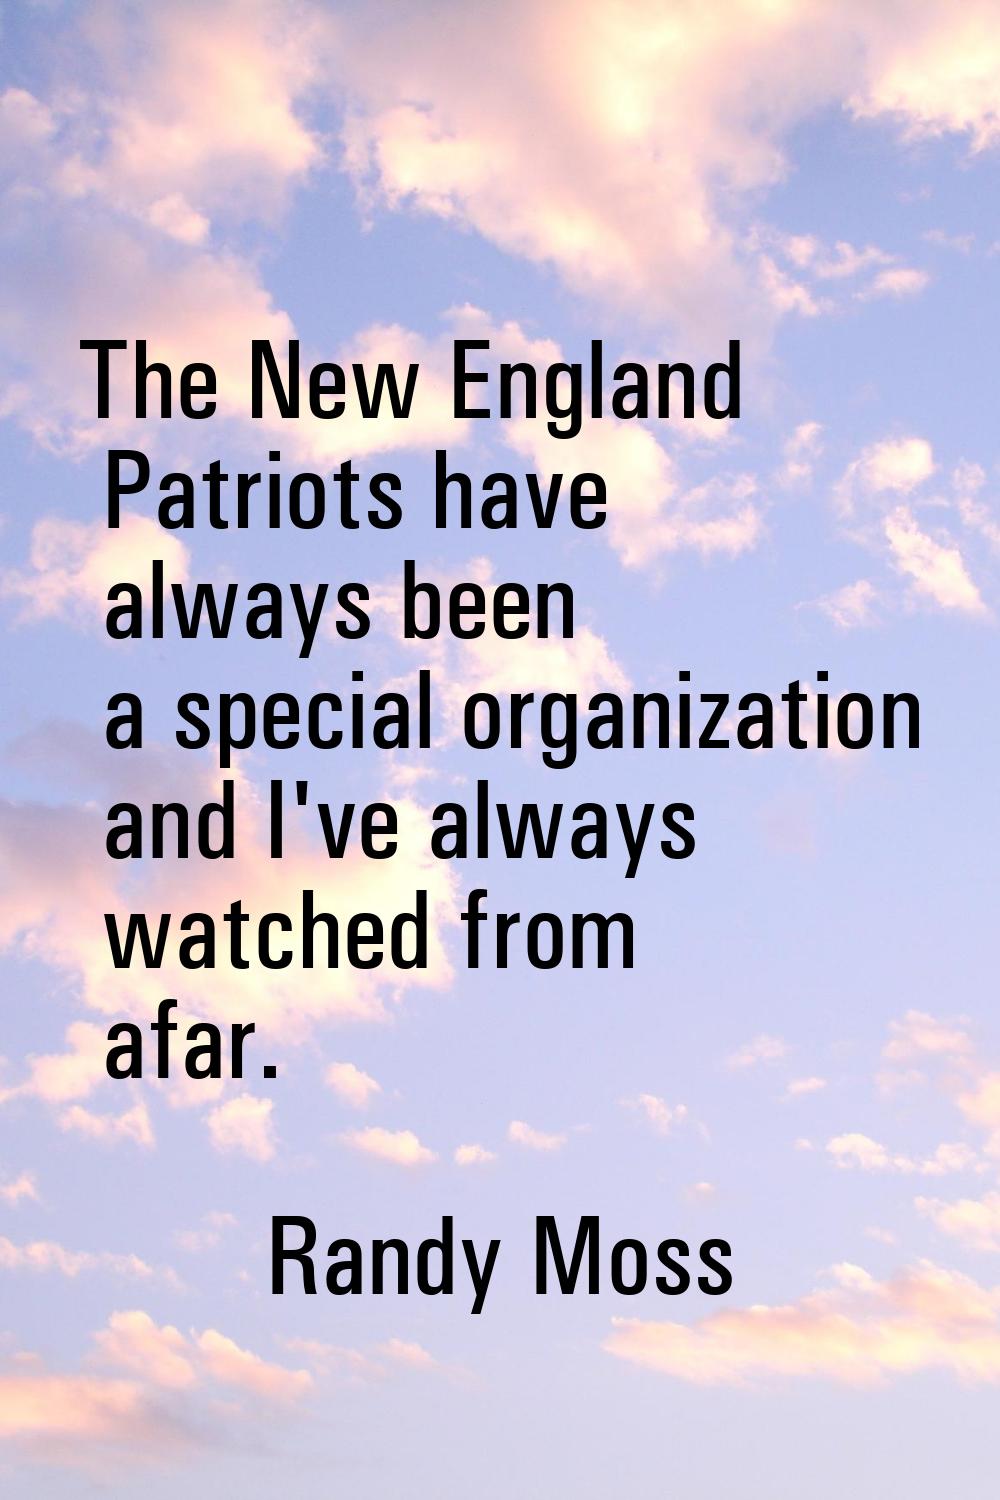 The New England Patriots have always been a special organization and I've always watched from afar.